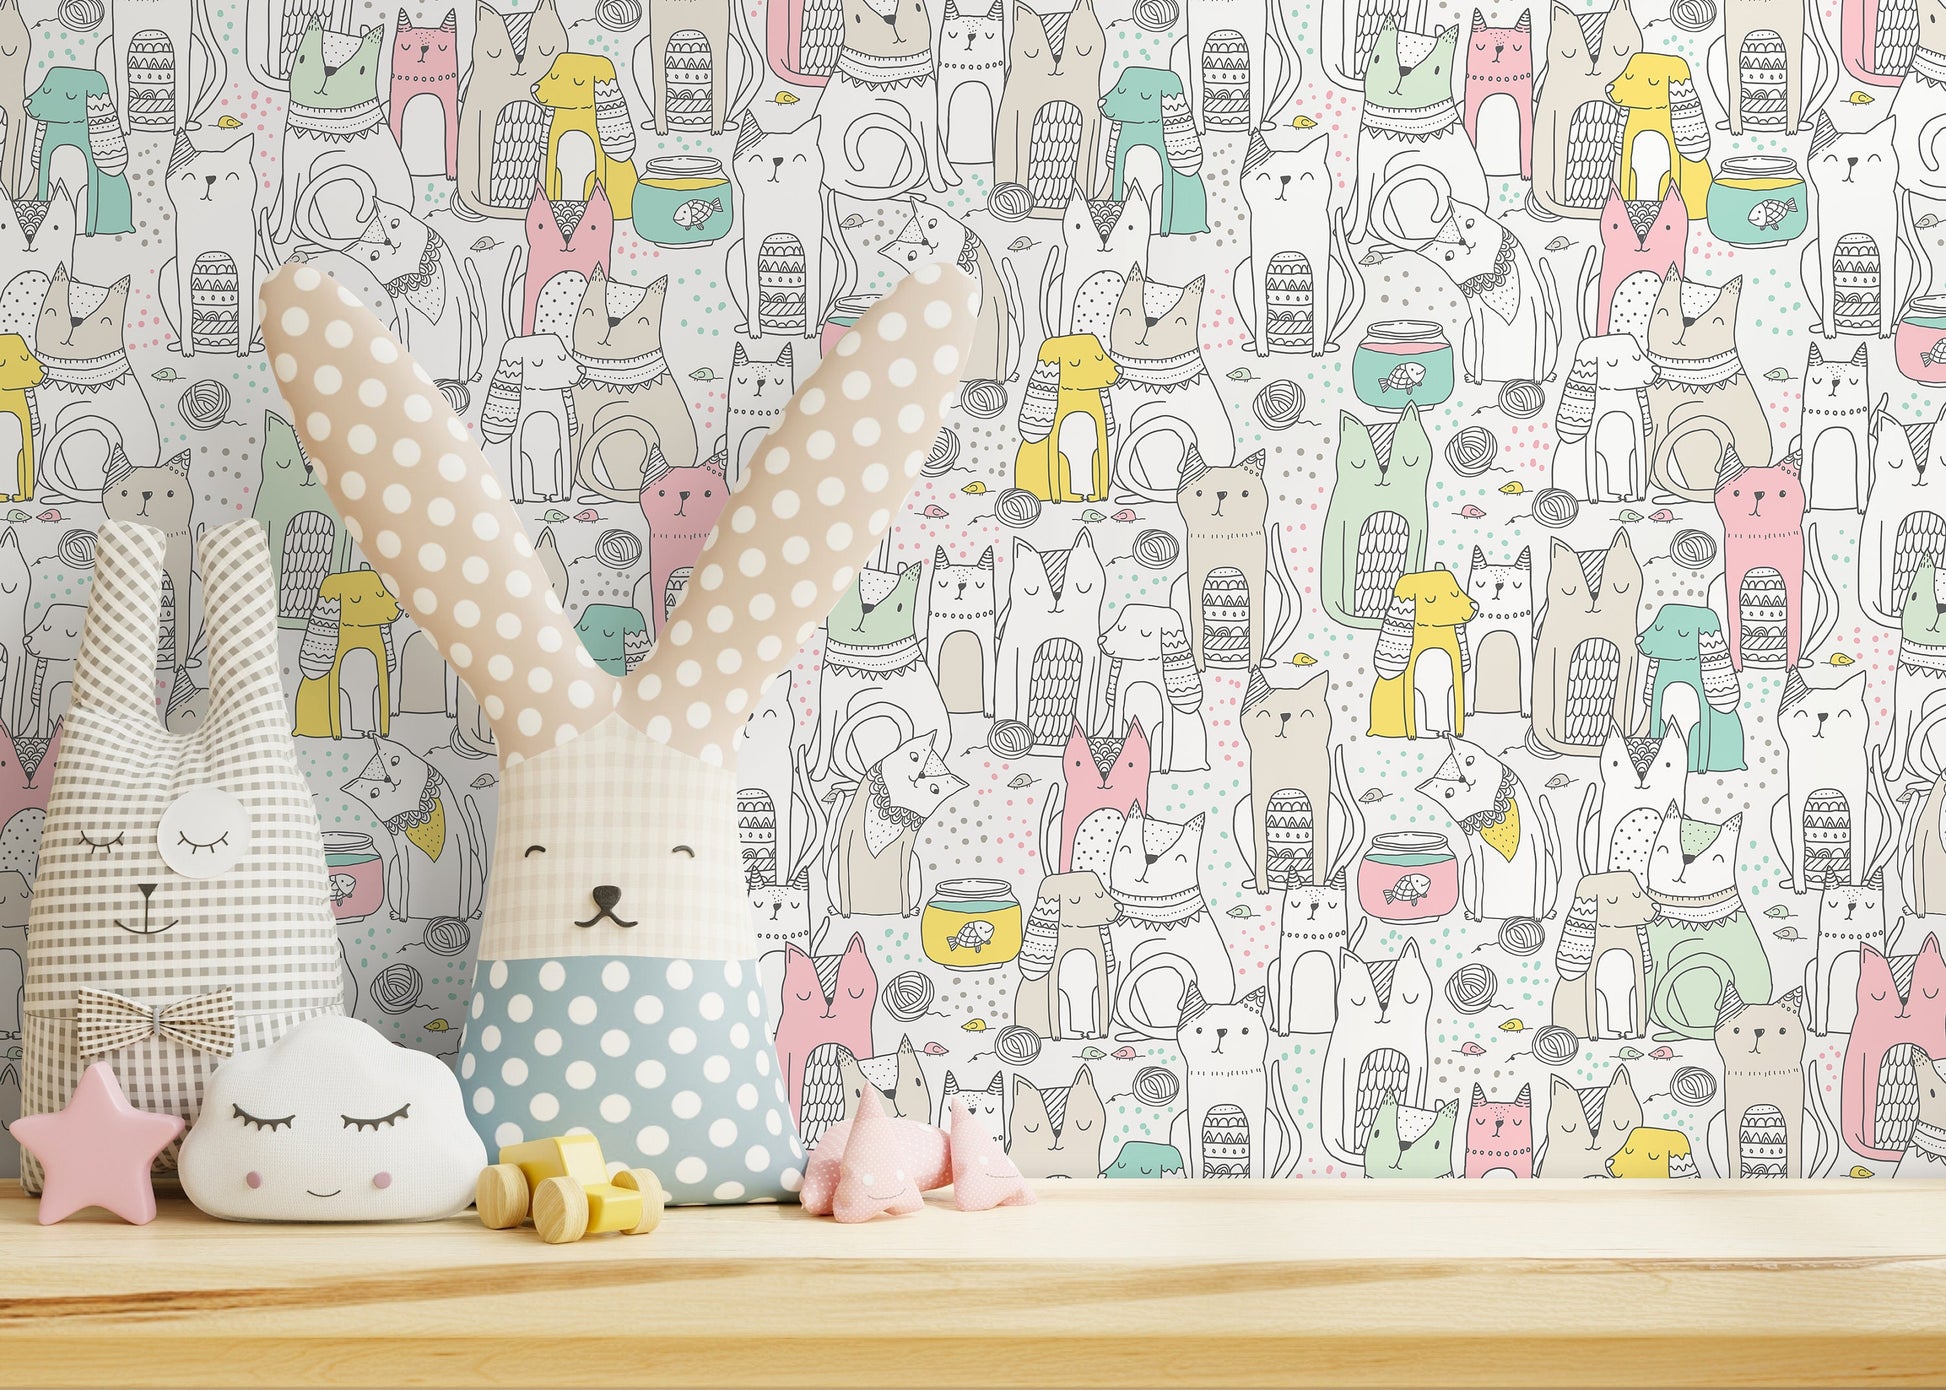 Nursery Cats And Dogs Removable Wallpaper Wall Decor Home Decor Wall Art Printable Wall Art Room Decor Wall Prints Wall Hanging - B899